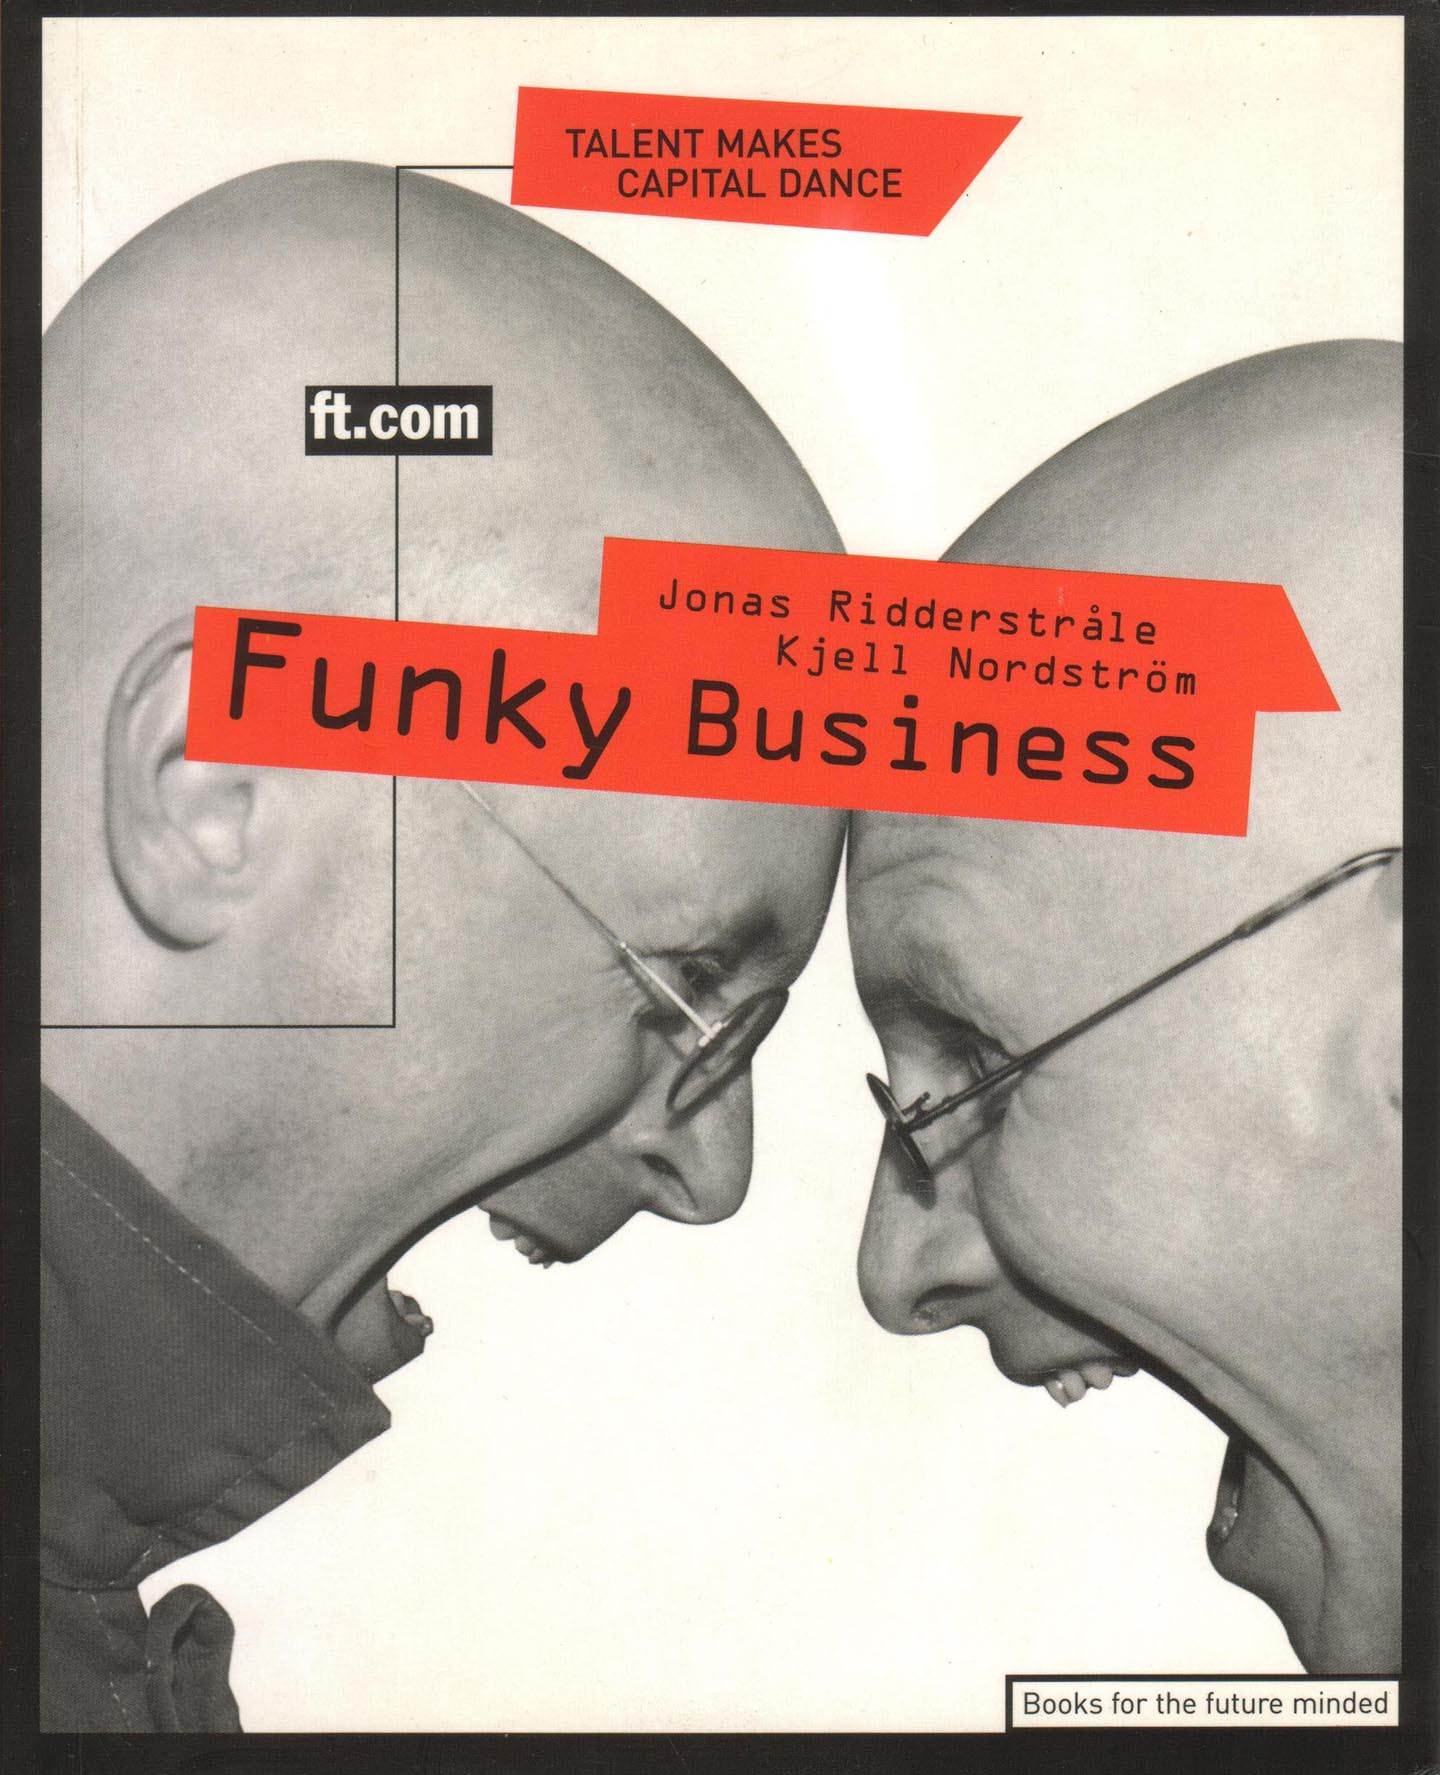 "Funky Business"